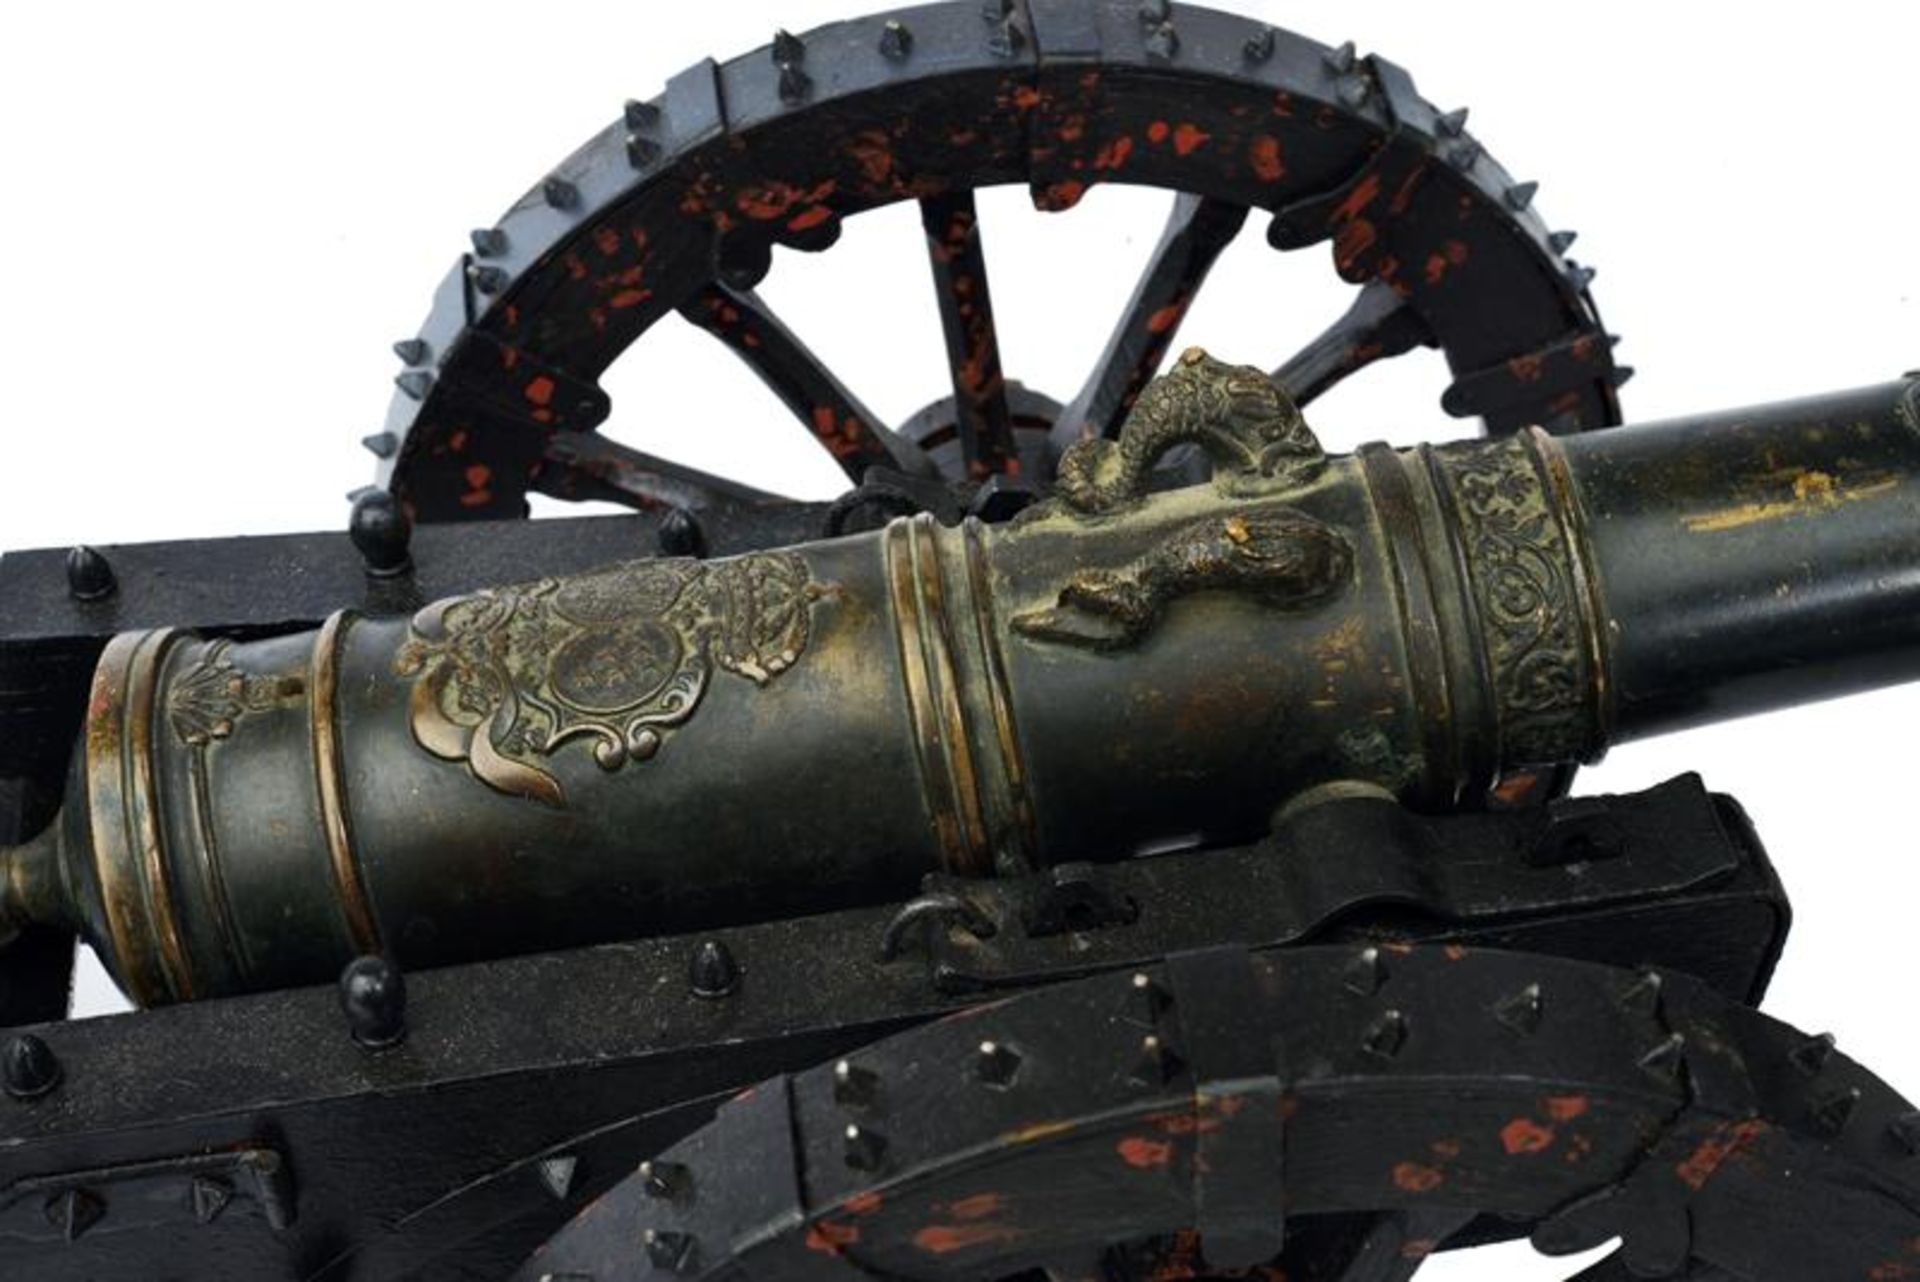 A bronze cannon model with the coat of arms of Elisabetta Farnese, Queen of Spain - Image 2 of 6